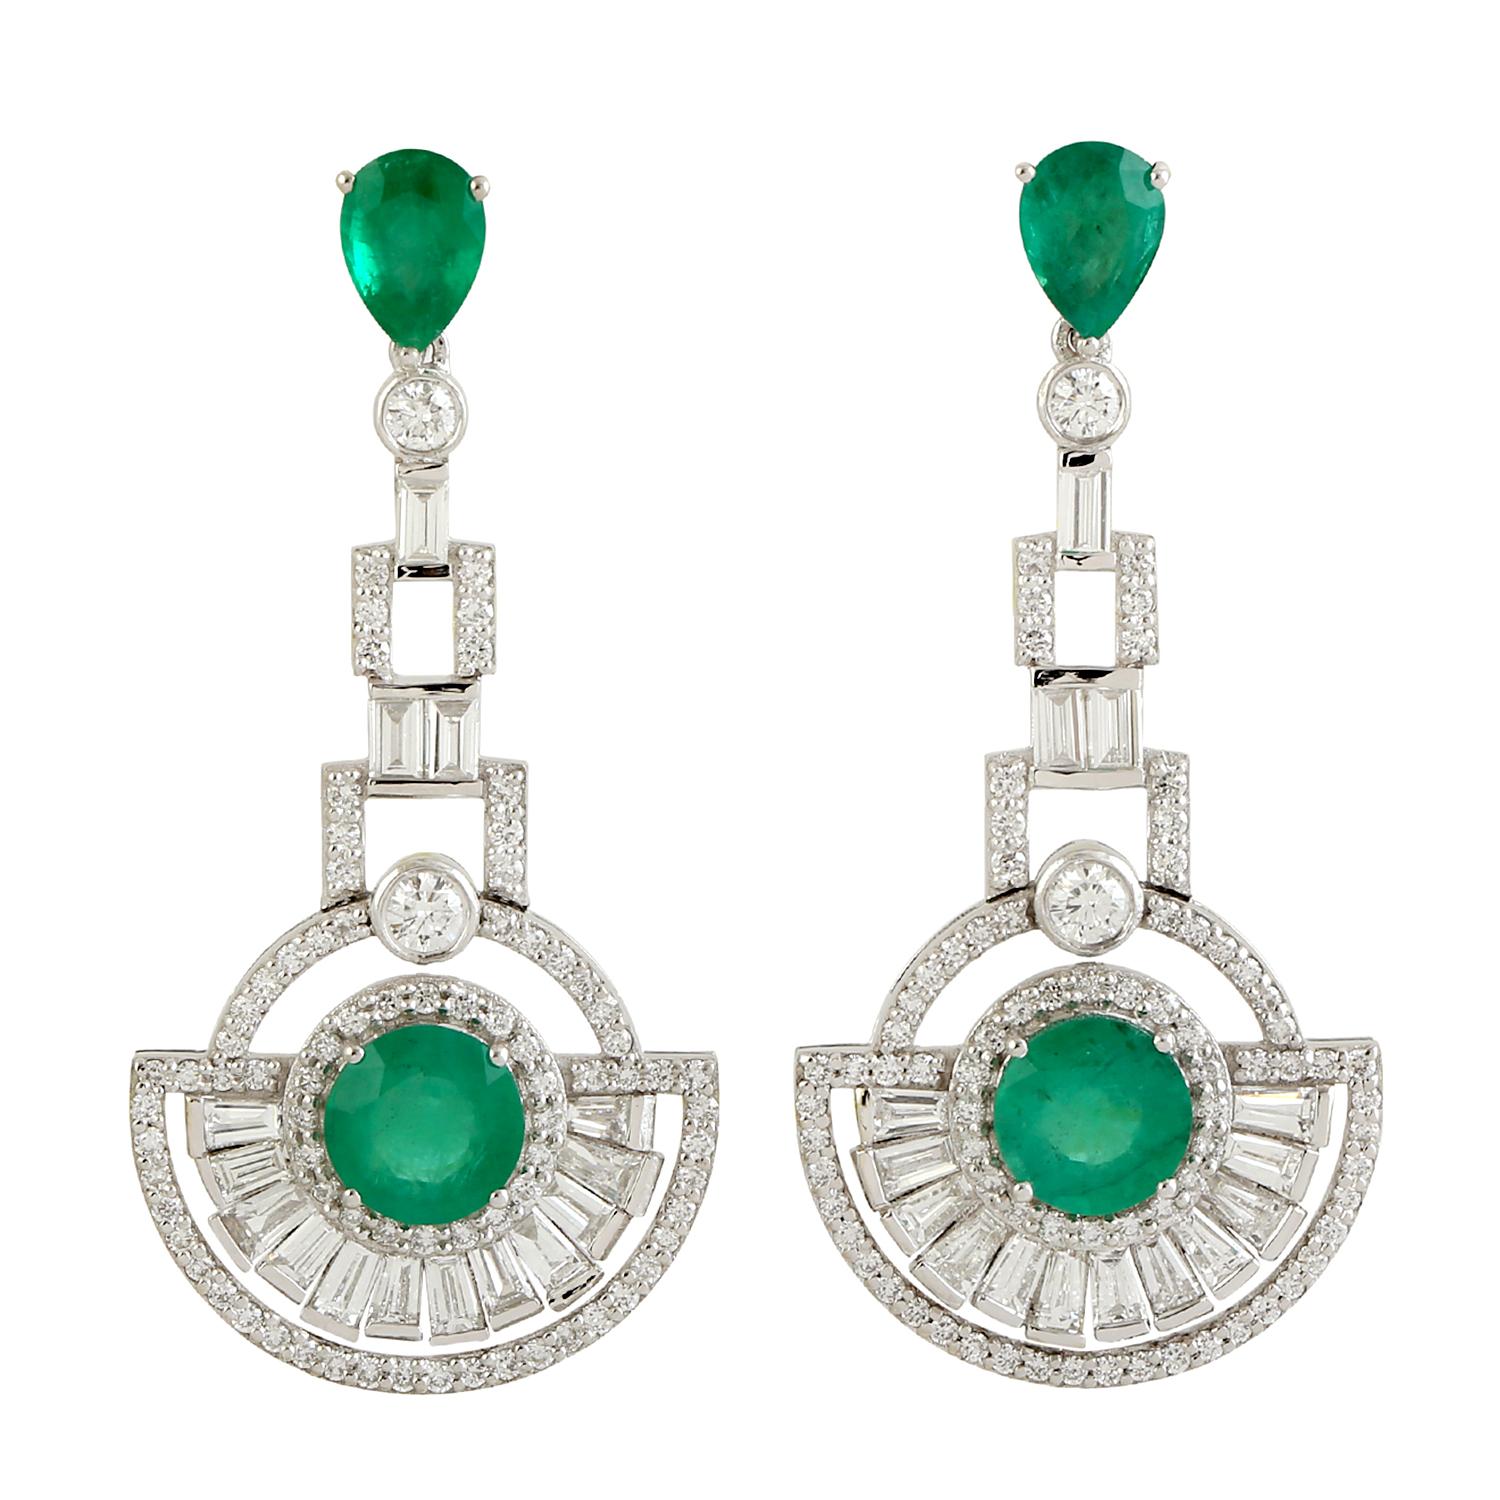 Mixed Cut Half Circle Dangle Earrings With Emerald & Diamonds Made In 18k White Gold For Sale